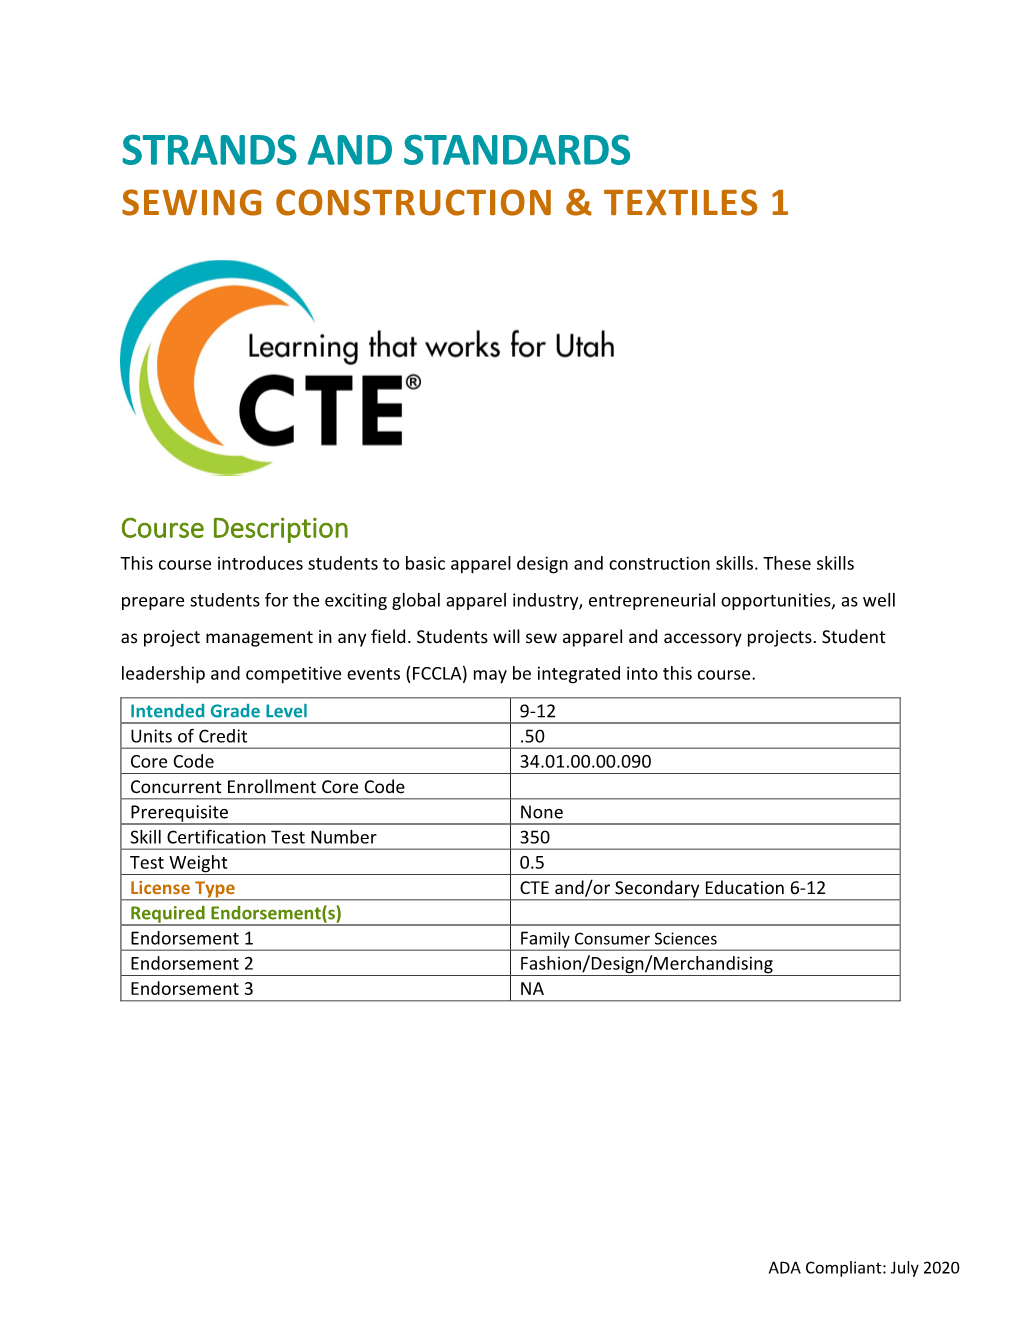 Sewing Construction and Textiles 1 Strands and Standards